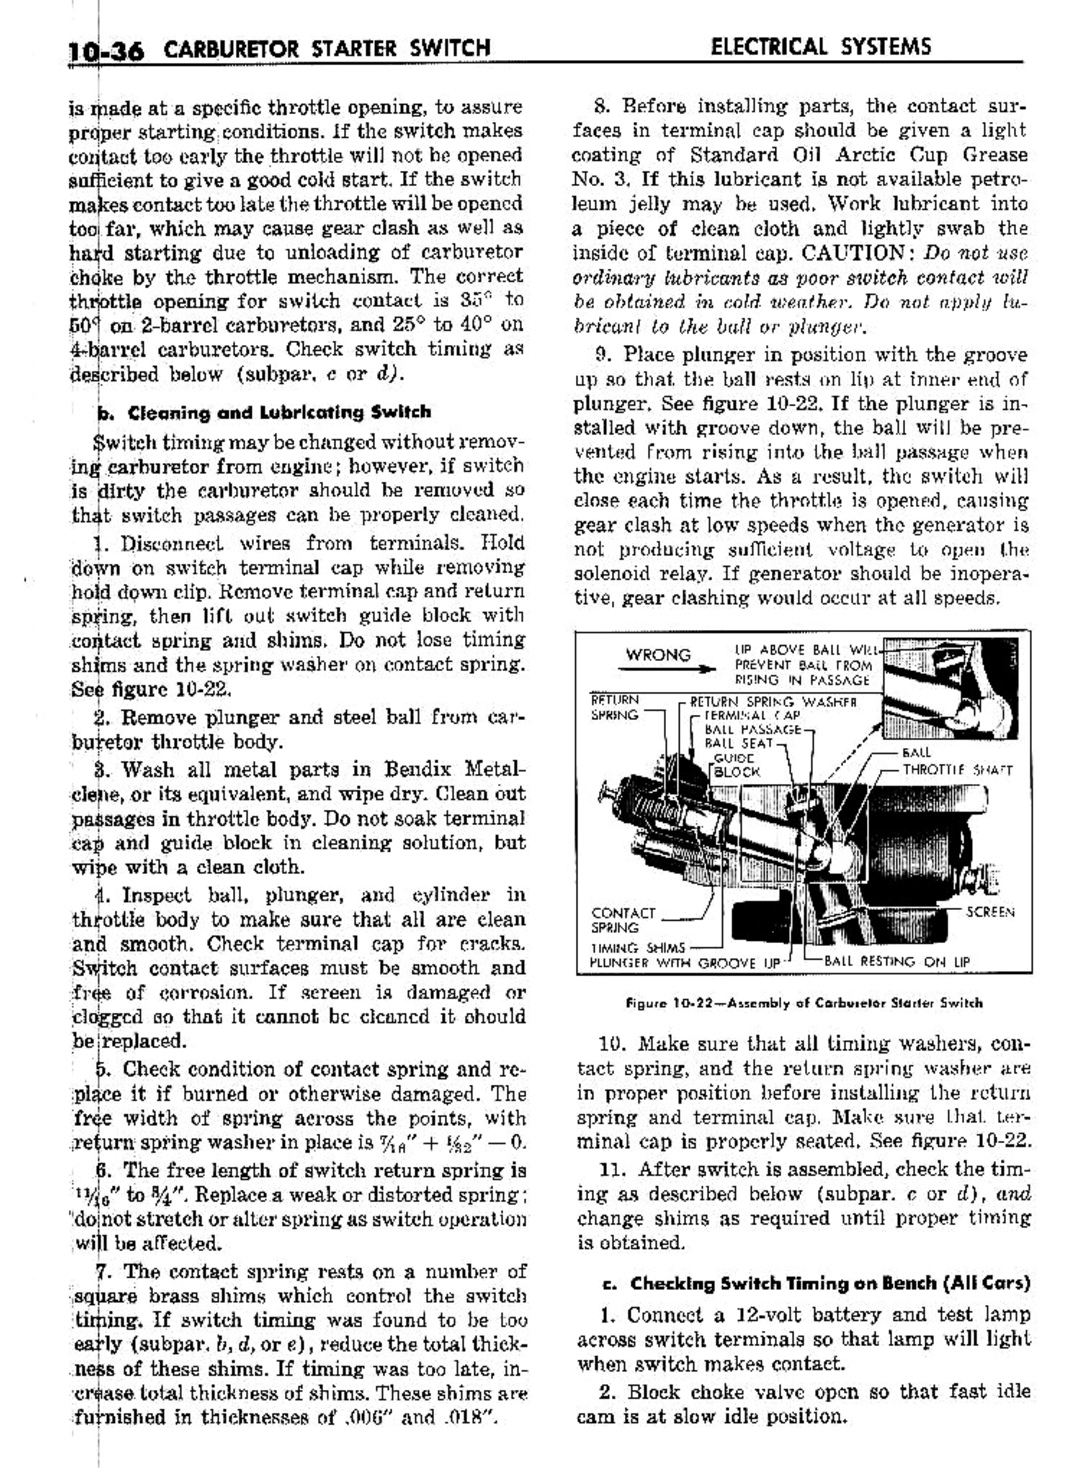 n_11 1959 Buick Shop Manual - Electrical Systems-036-036.jpg